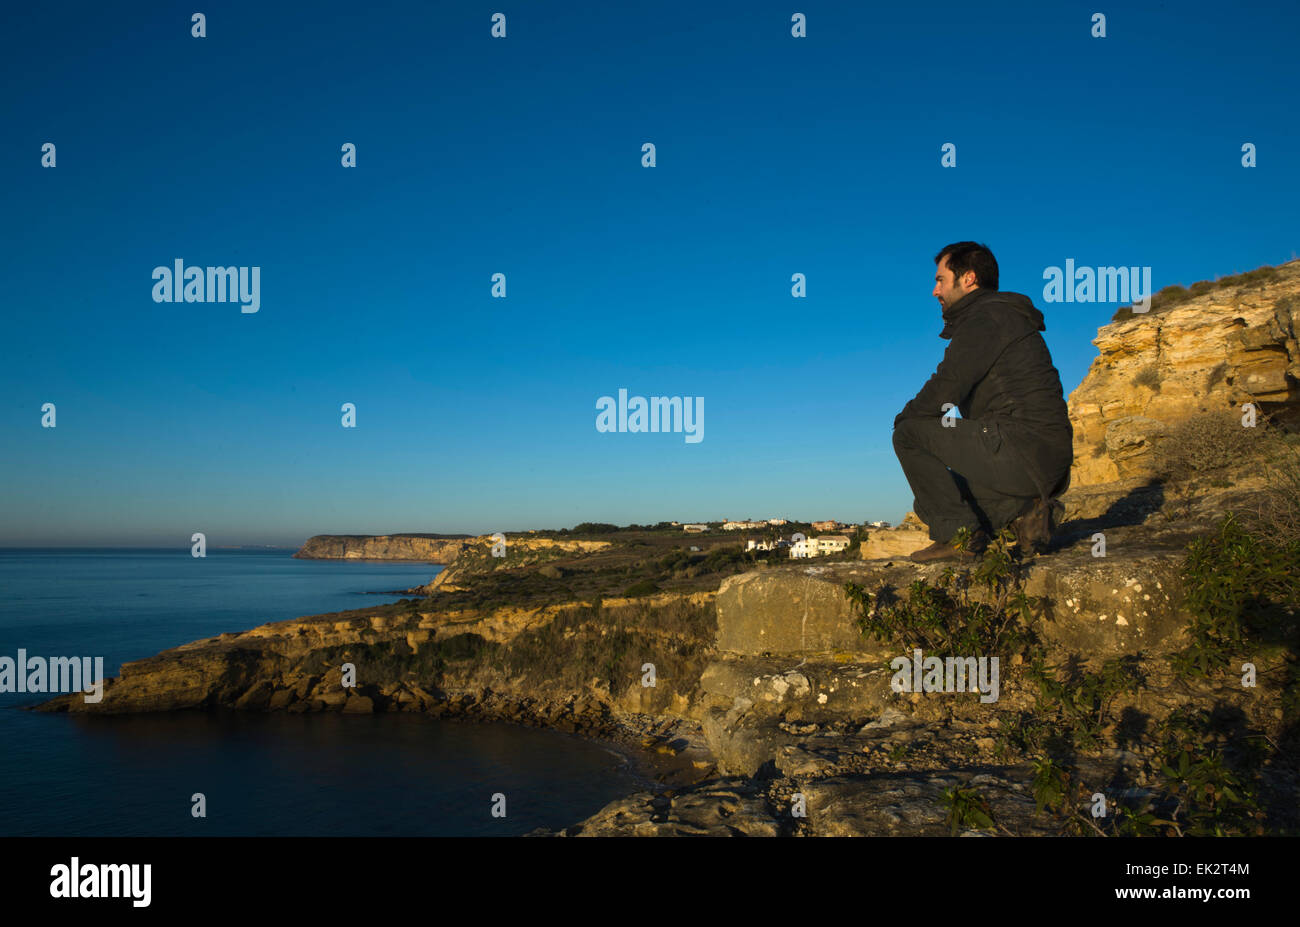 Man by himself on cliff overlooking sea Stock Photo